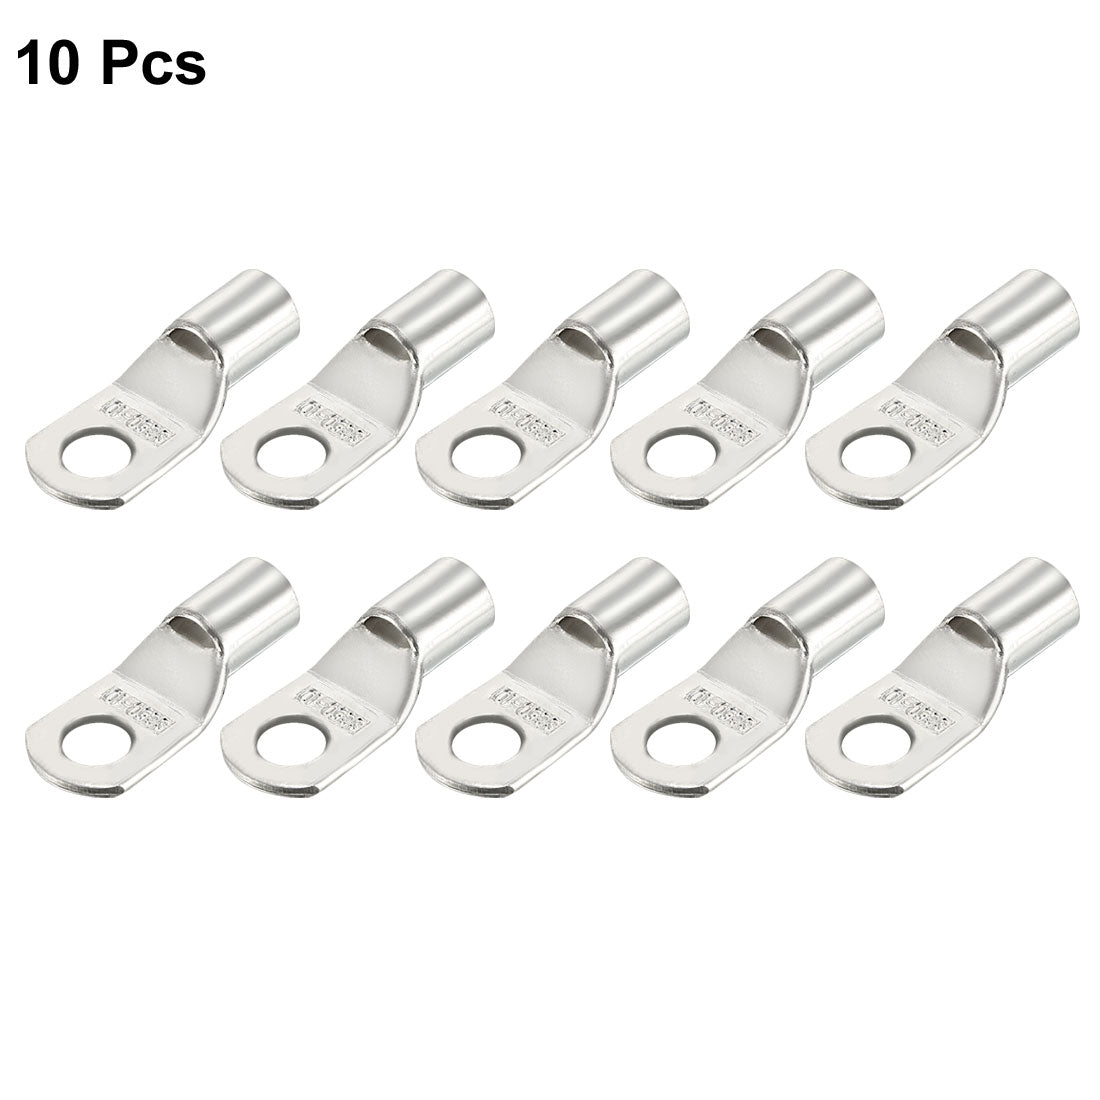 uxcell Uxcell 10Pcs SC50-10 Non-Insulated U-Type Copper Crimp Terminals 10mm Wire Connector Silver Tone